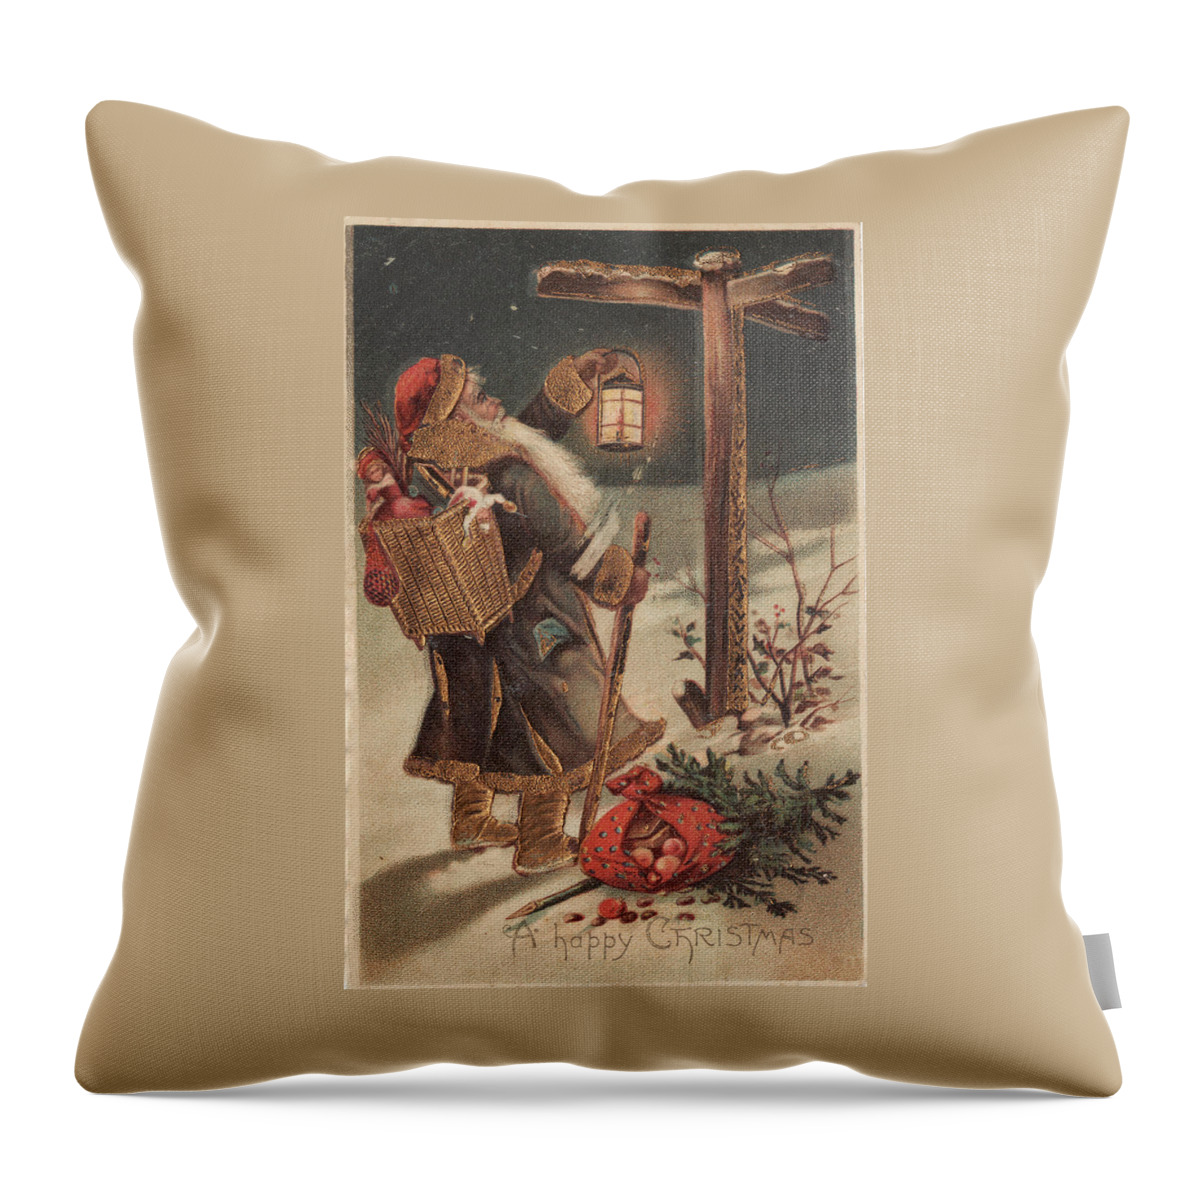 Christmas Throw Pillow featuring the photograph Father Christmas by Kristia Adams